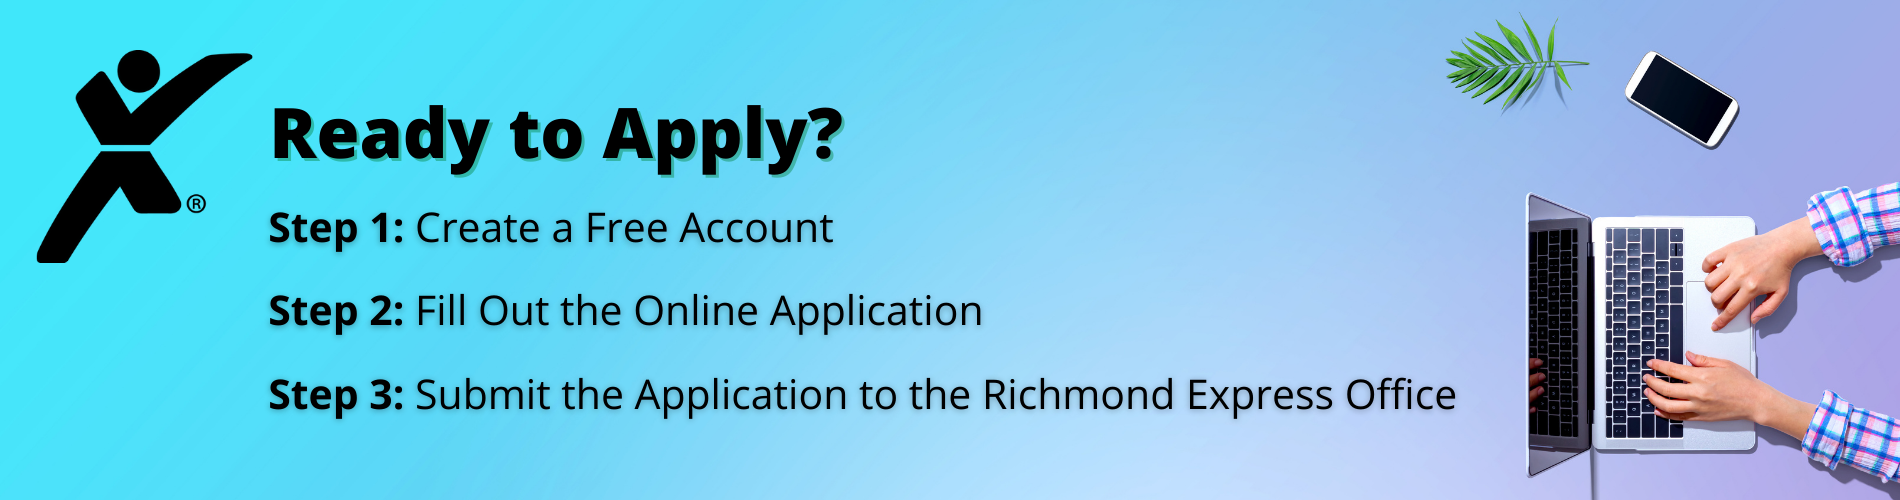 How to Apply with Express Richmond